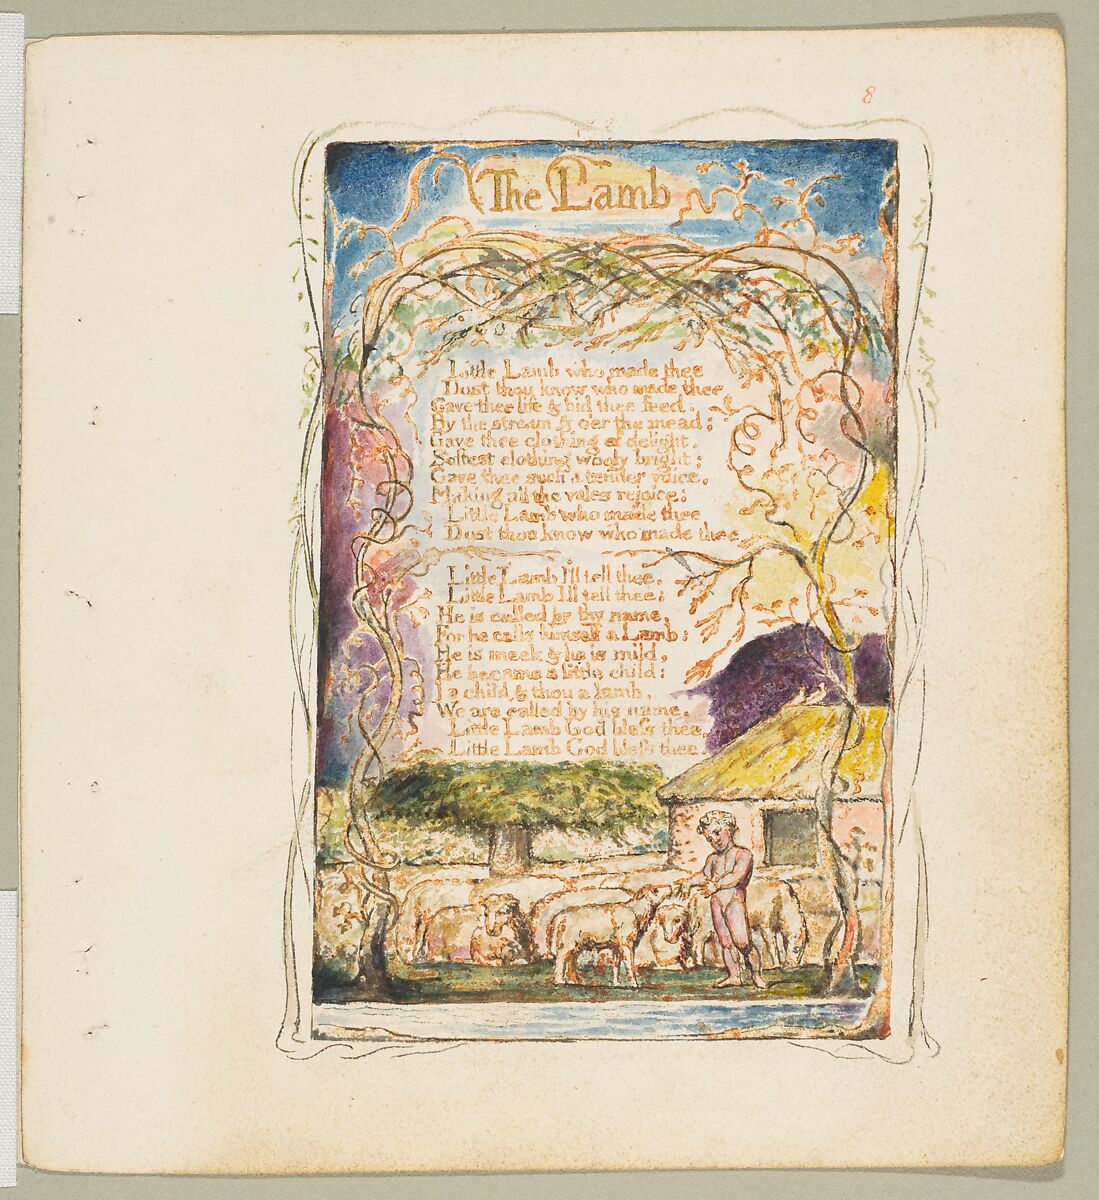 Songs of Innocence: The Lamb, William Blake, Relief etching printed in orange-brown ink and hand-colored with watercolor and shell gold